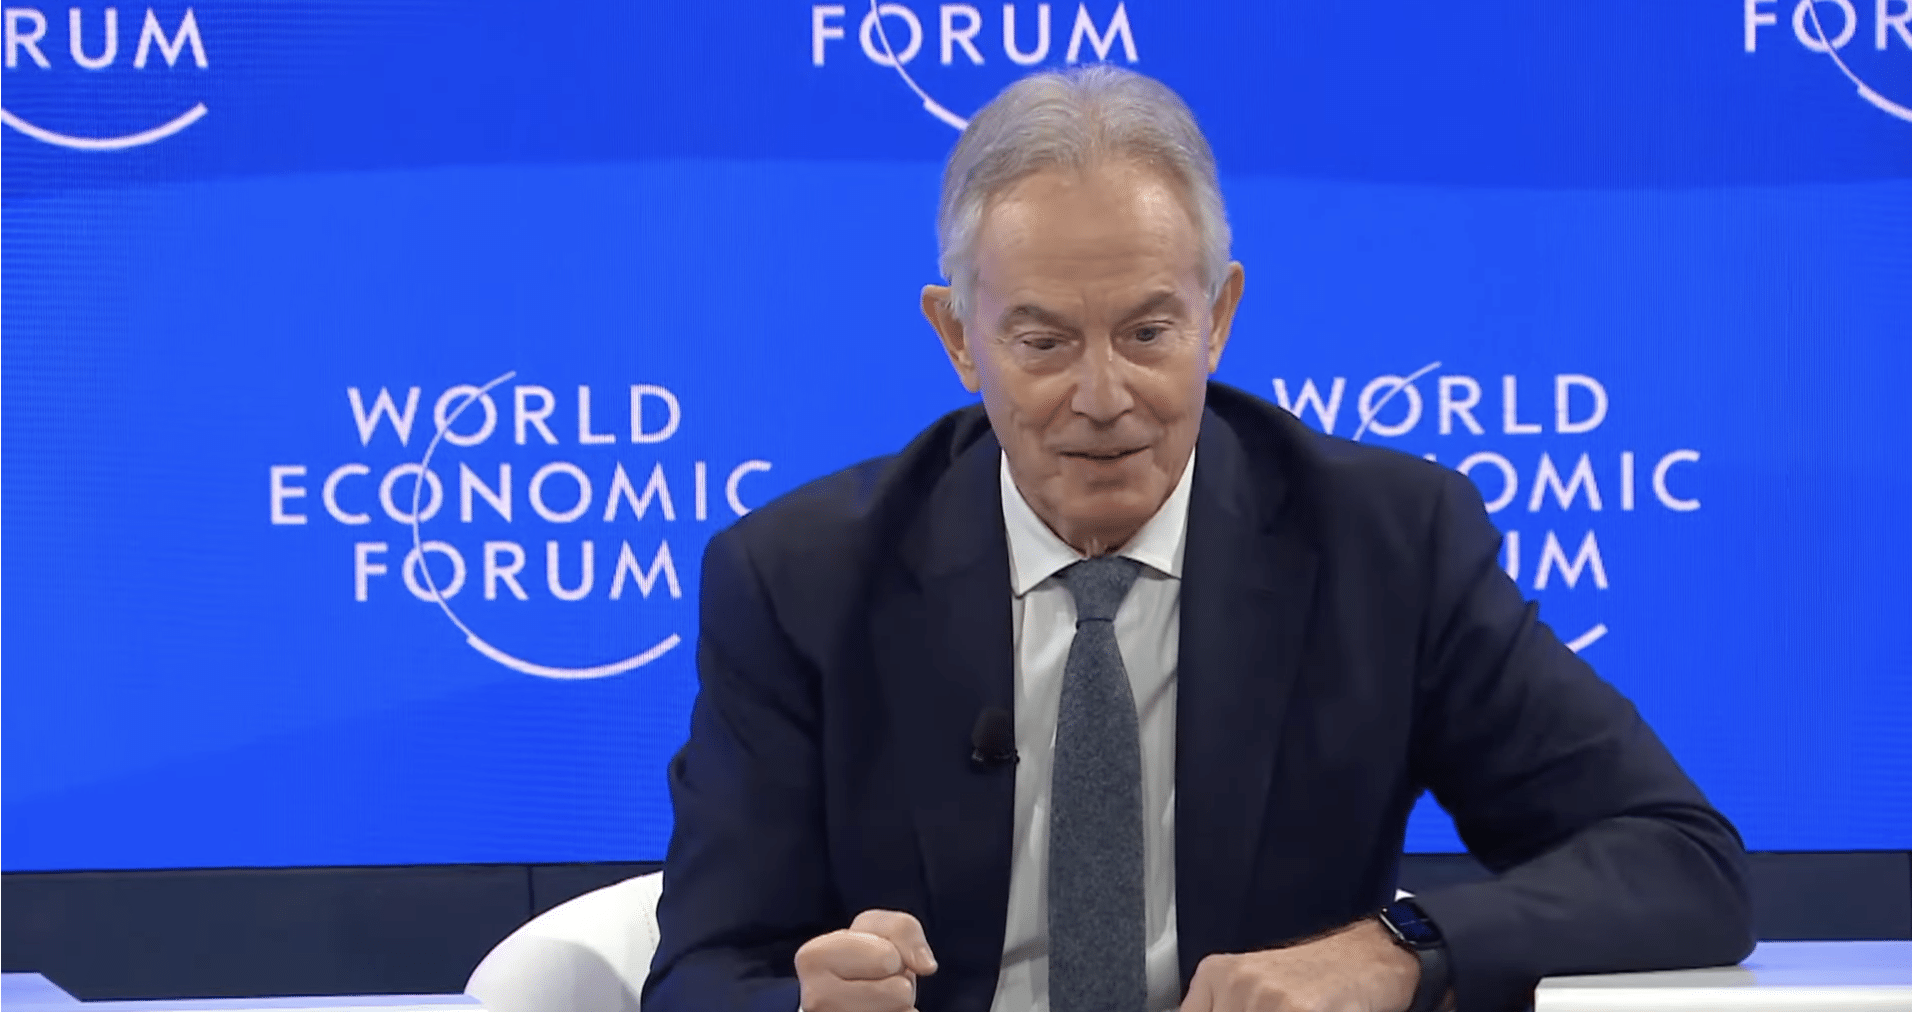 Tony Blair is calling for digital libraries to track vaccines – ‘You need the data, you need to know’